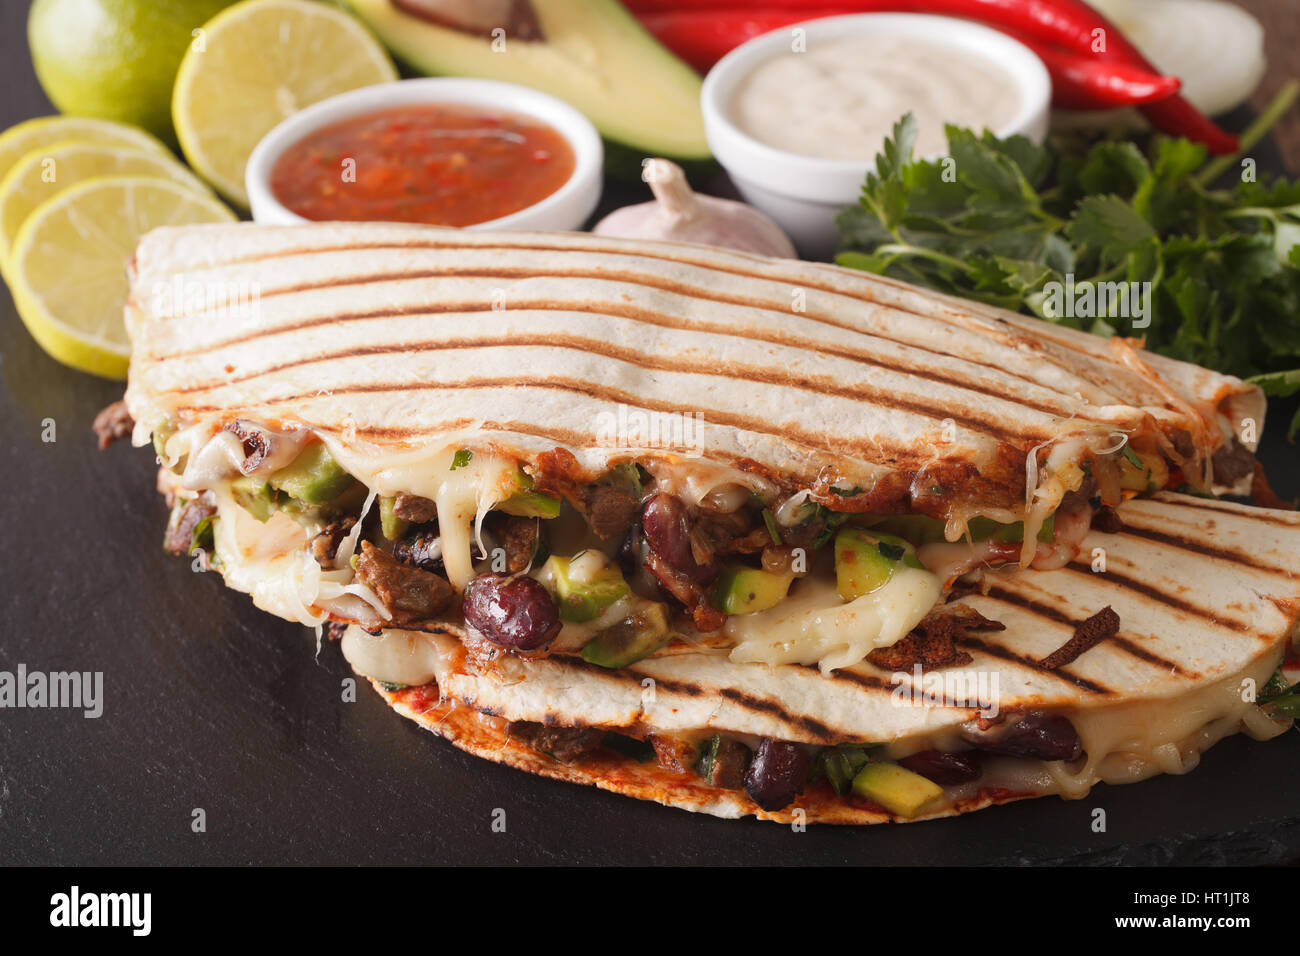 Mexican food: Quesadillas with beef, beans, avocado and cheese close-up on the table. horizontal Stock Photo